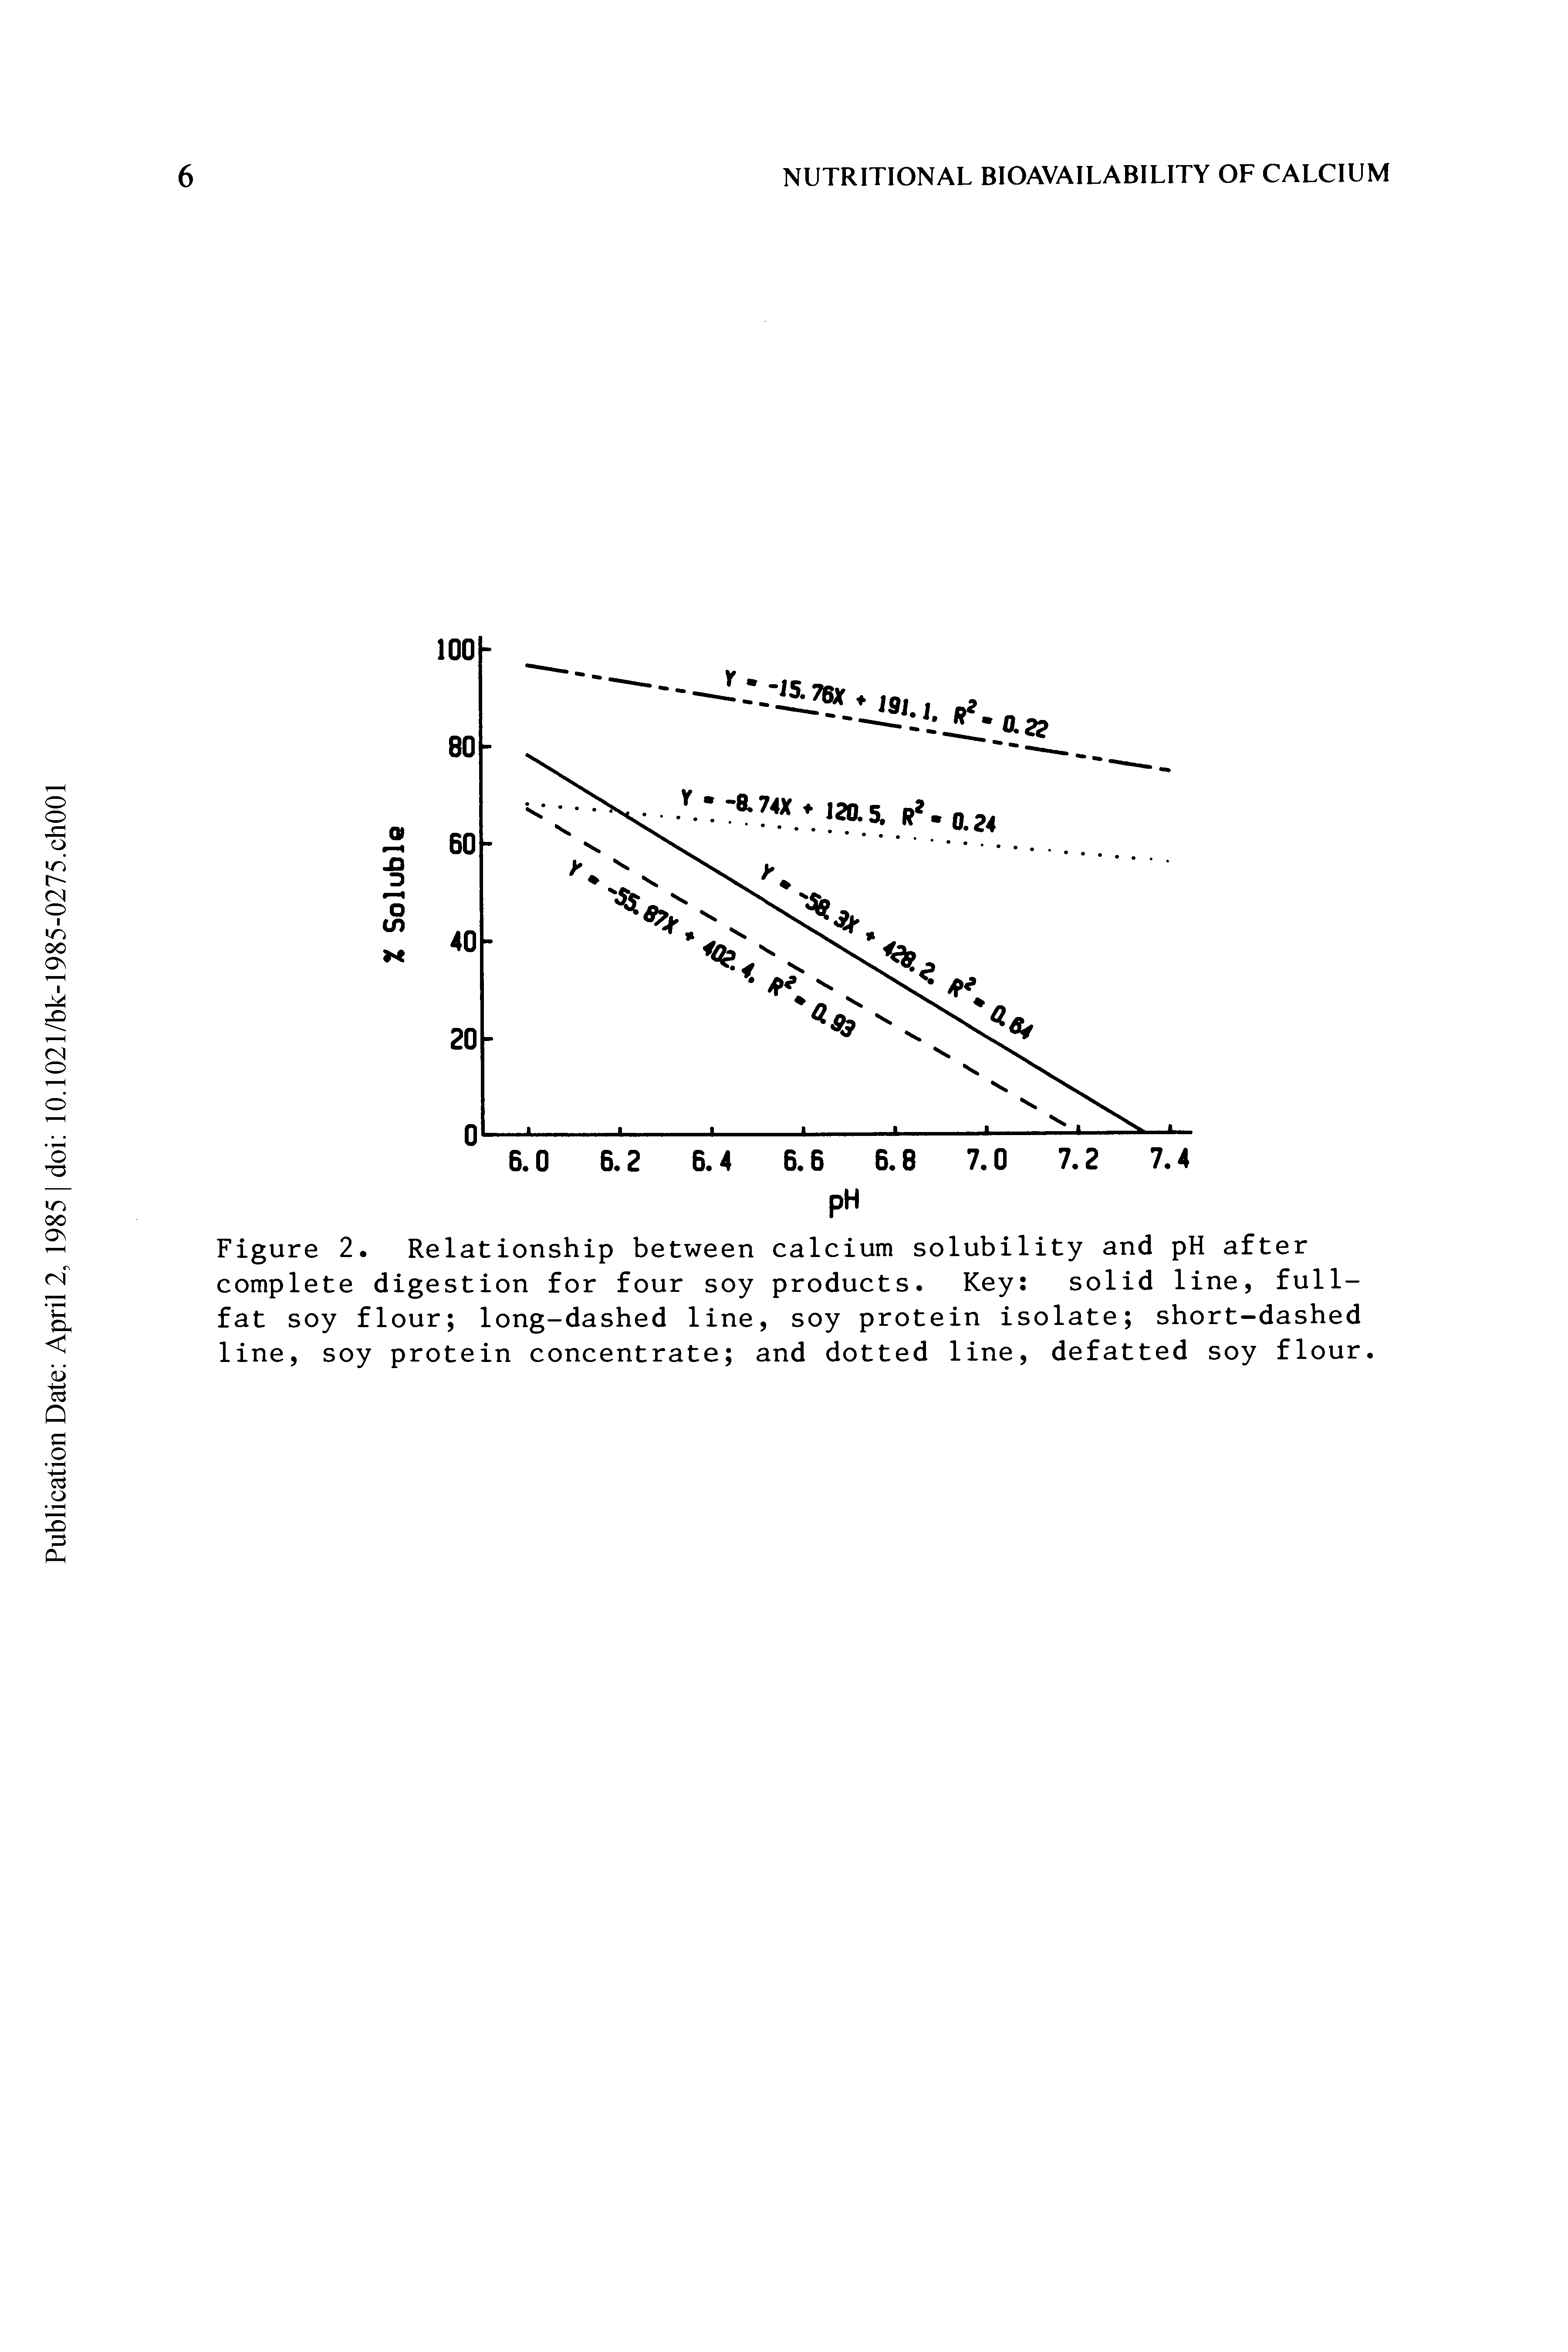 Figure 2. Relationship between calcium solubility and pH after complete digestion for four soy products. Key solid line, full-fat soy flour long-dashed line, soy protein isolate short-dashed line, soy protein concentrate and dotted line, defatted soy flour...